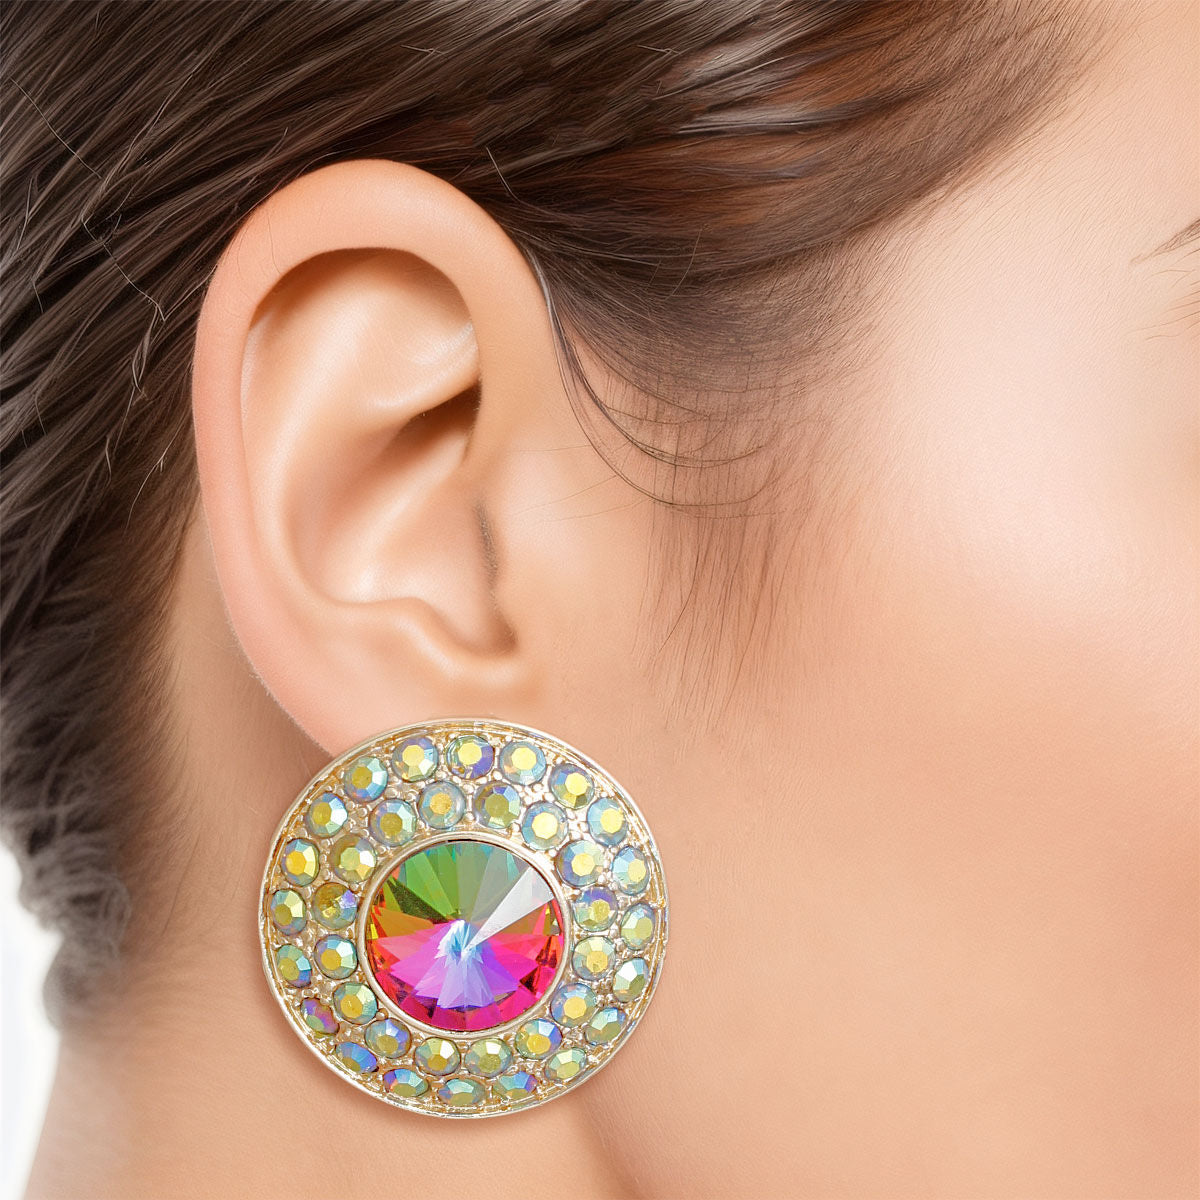 Clip On Small Pink Green Dome Earrings for Women